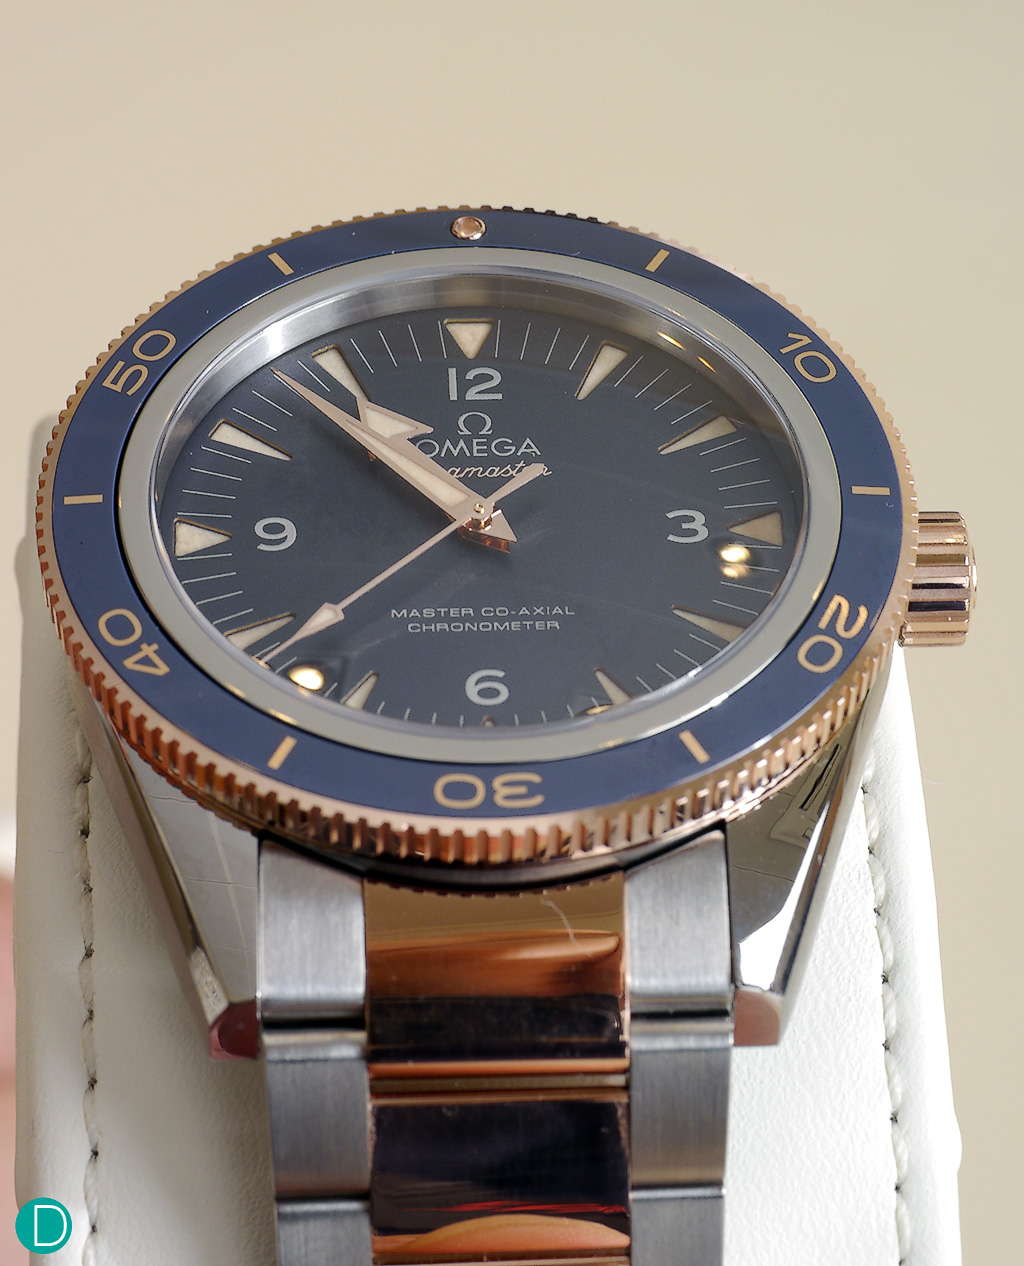 One of the variants of the Seamaster 300; this one features a two-tone combination.